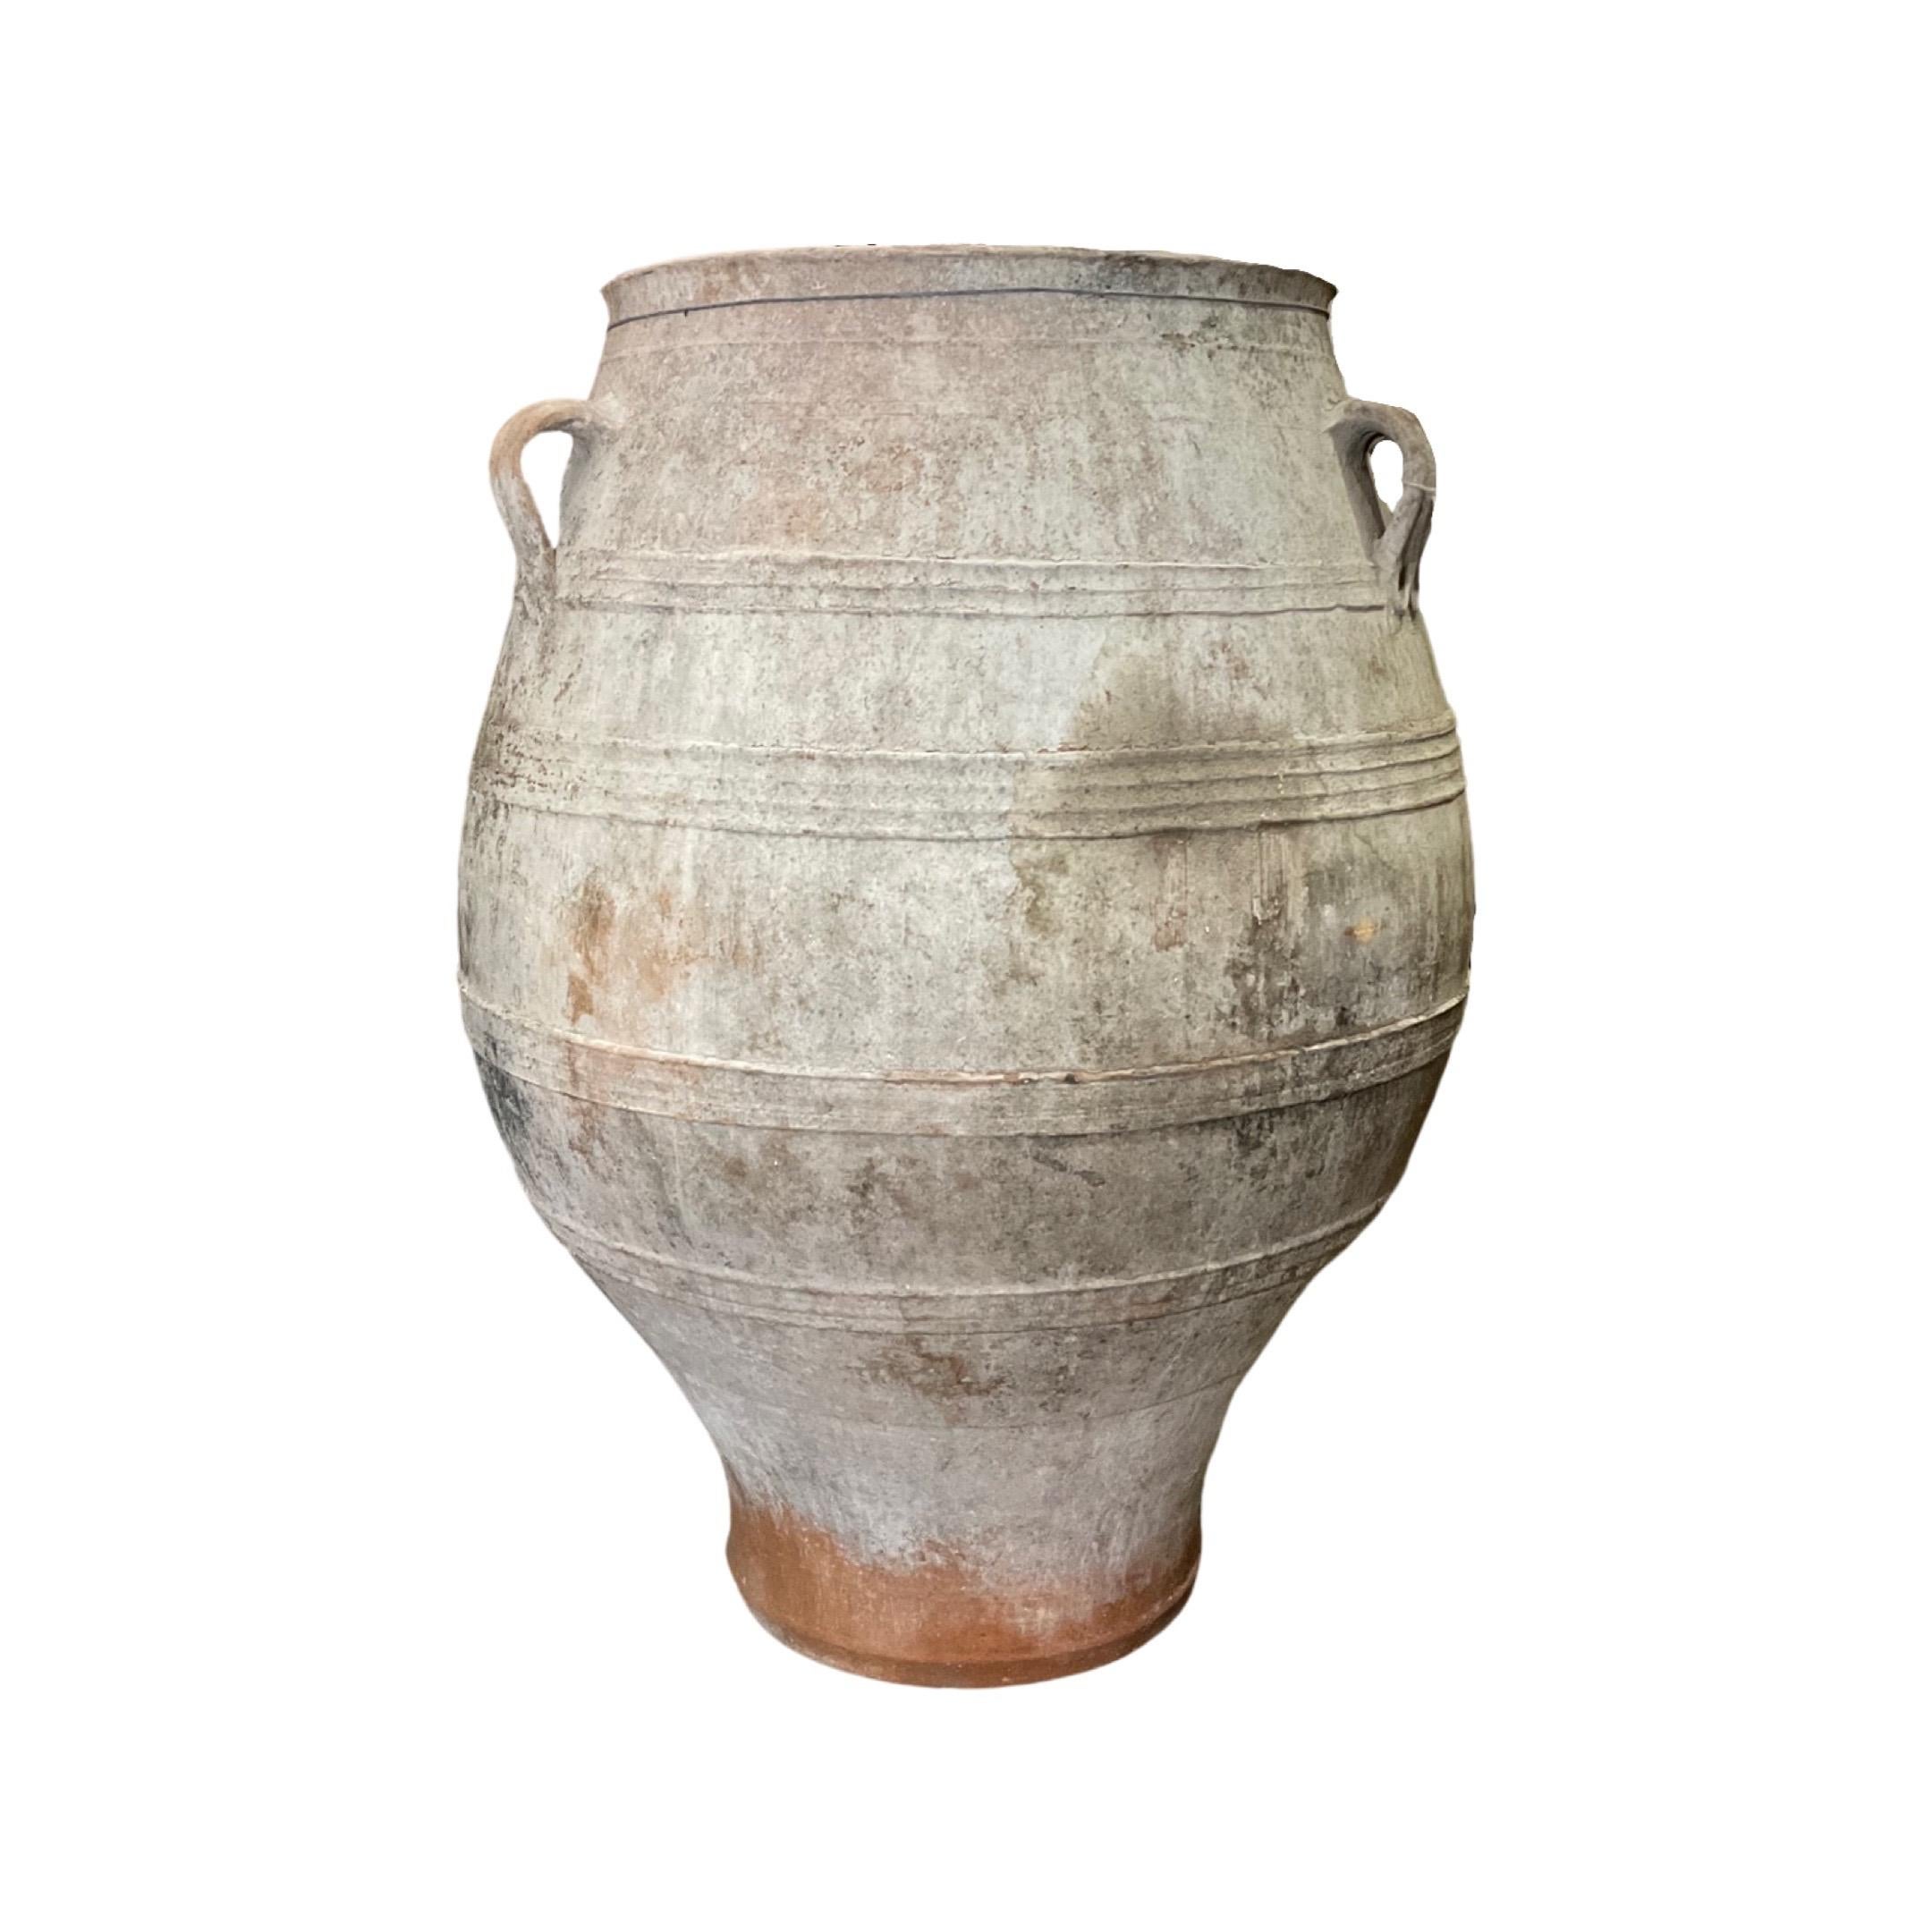 Bring a touch of traditional elegance to your outdoor space with this Greece Terracotta Planter. Crafted from high-fired clay and featuring an 18th century design, this durable planter is frost-proof and designed to last a lifetime. Enhance any